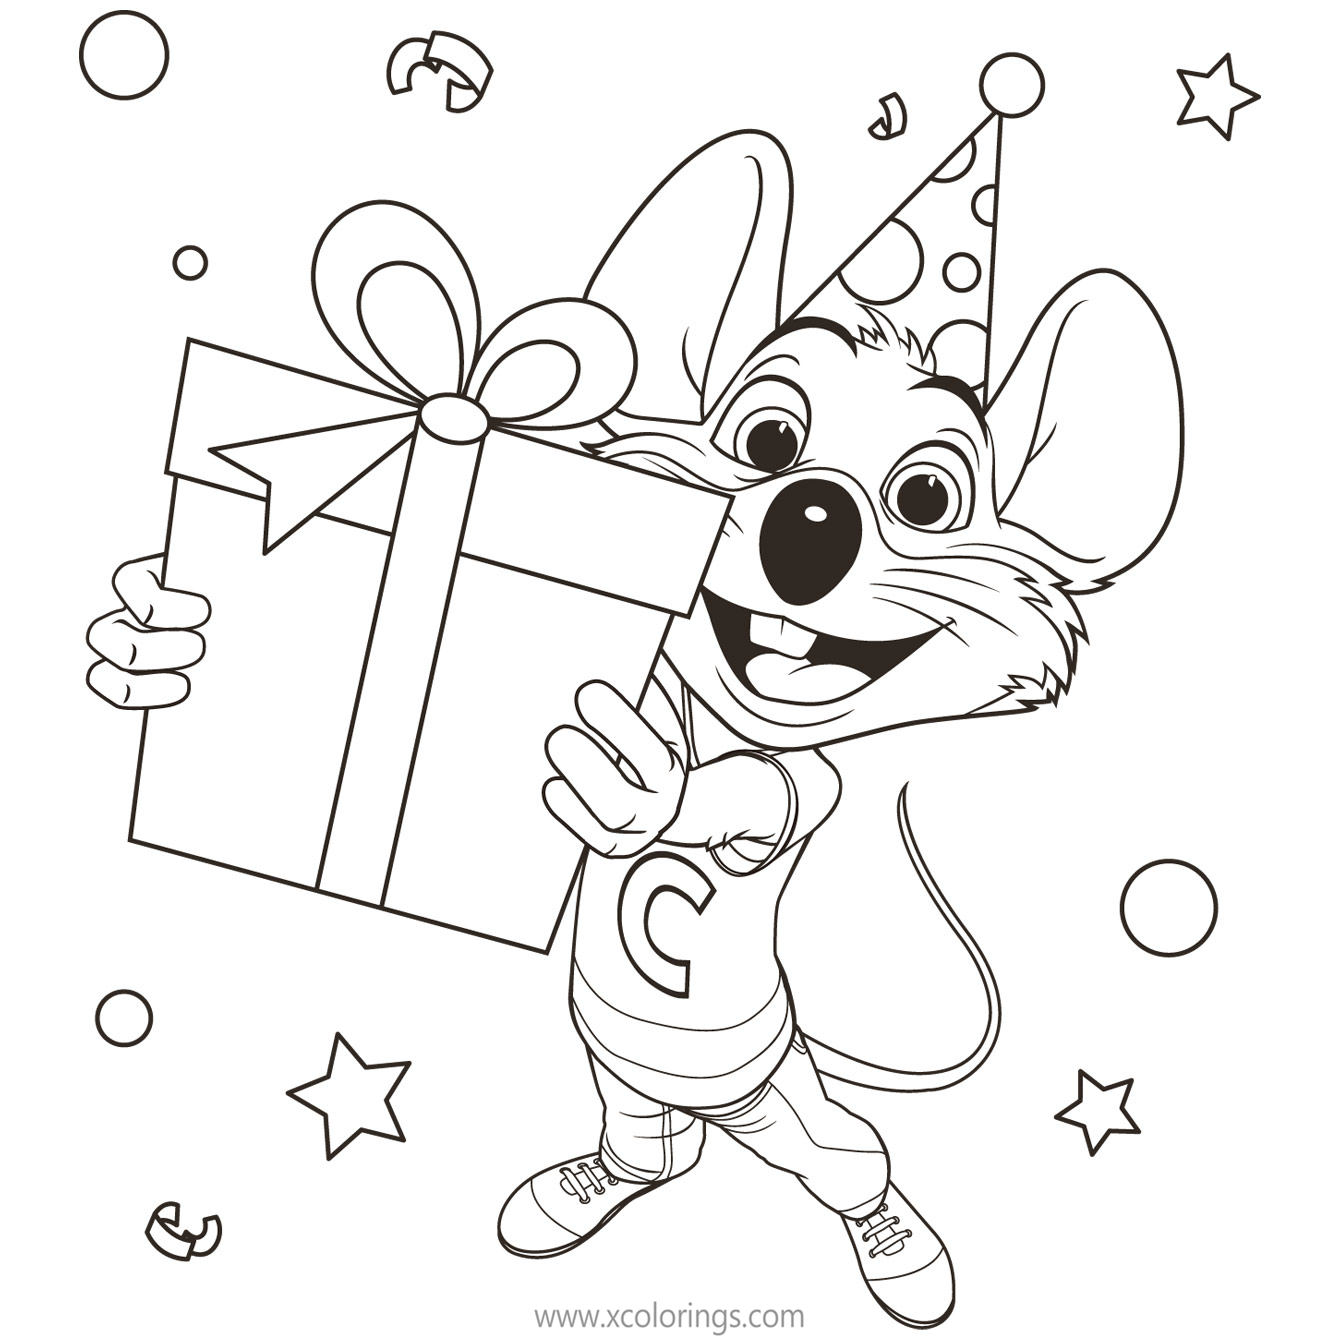 Free Chuck E Cheese Coloring Pages Birthday Gift printable